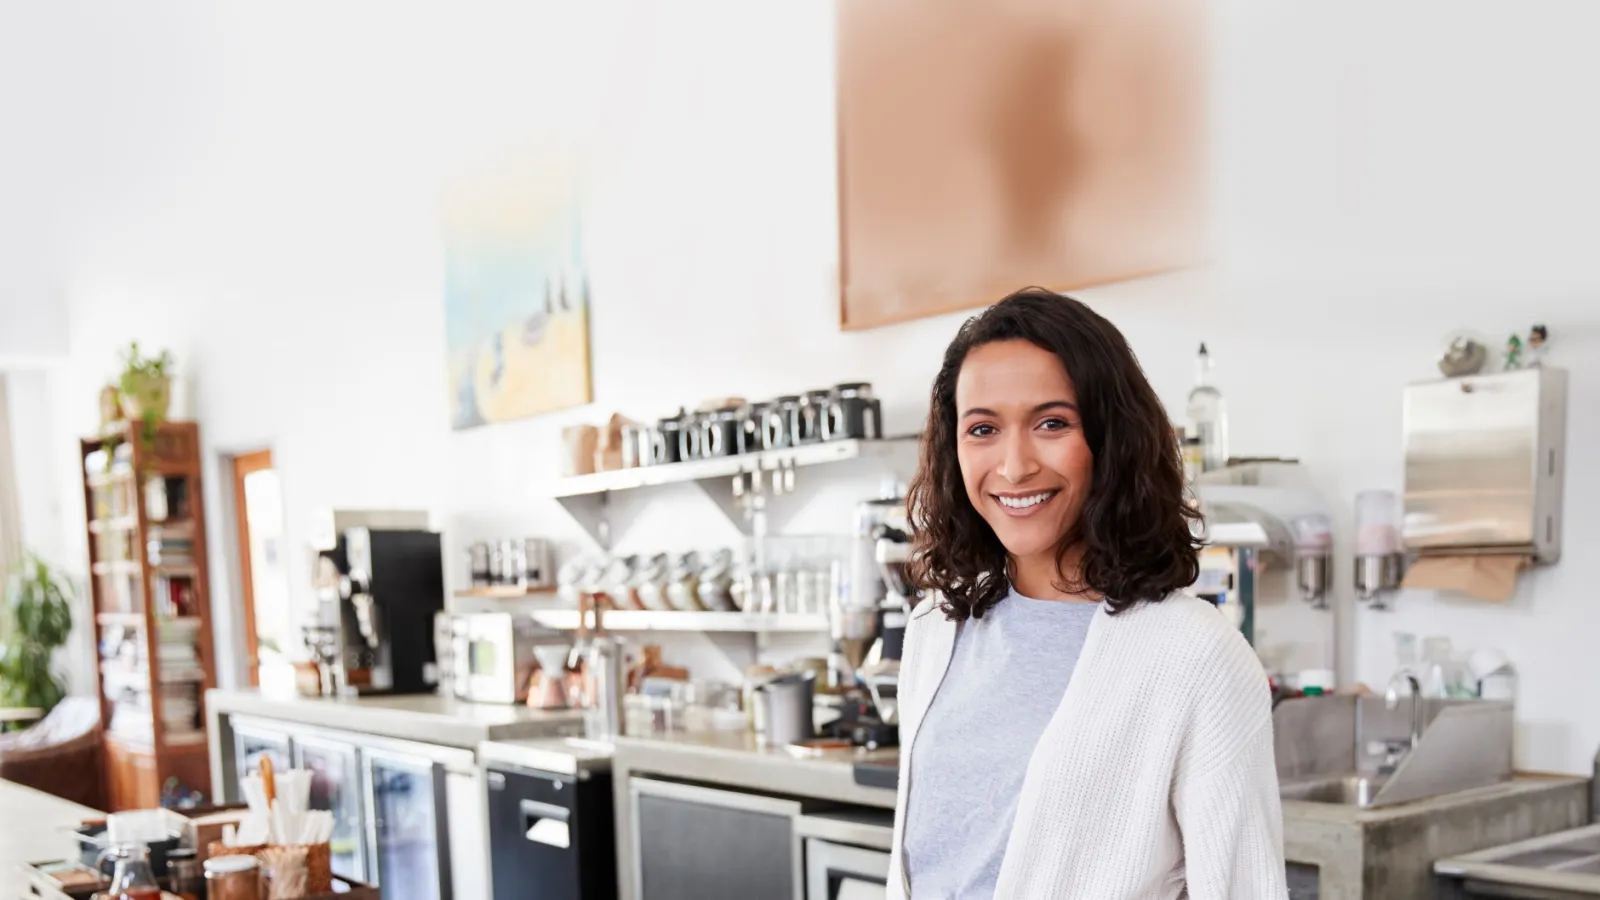 Small business woman ready to take your order in cafe